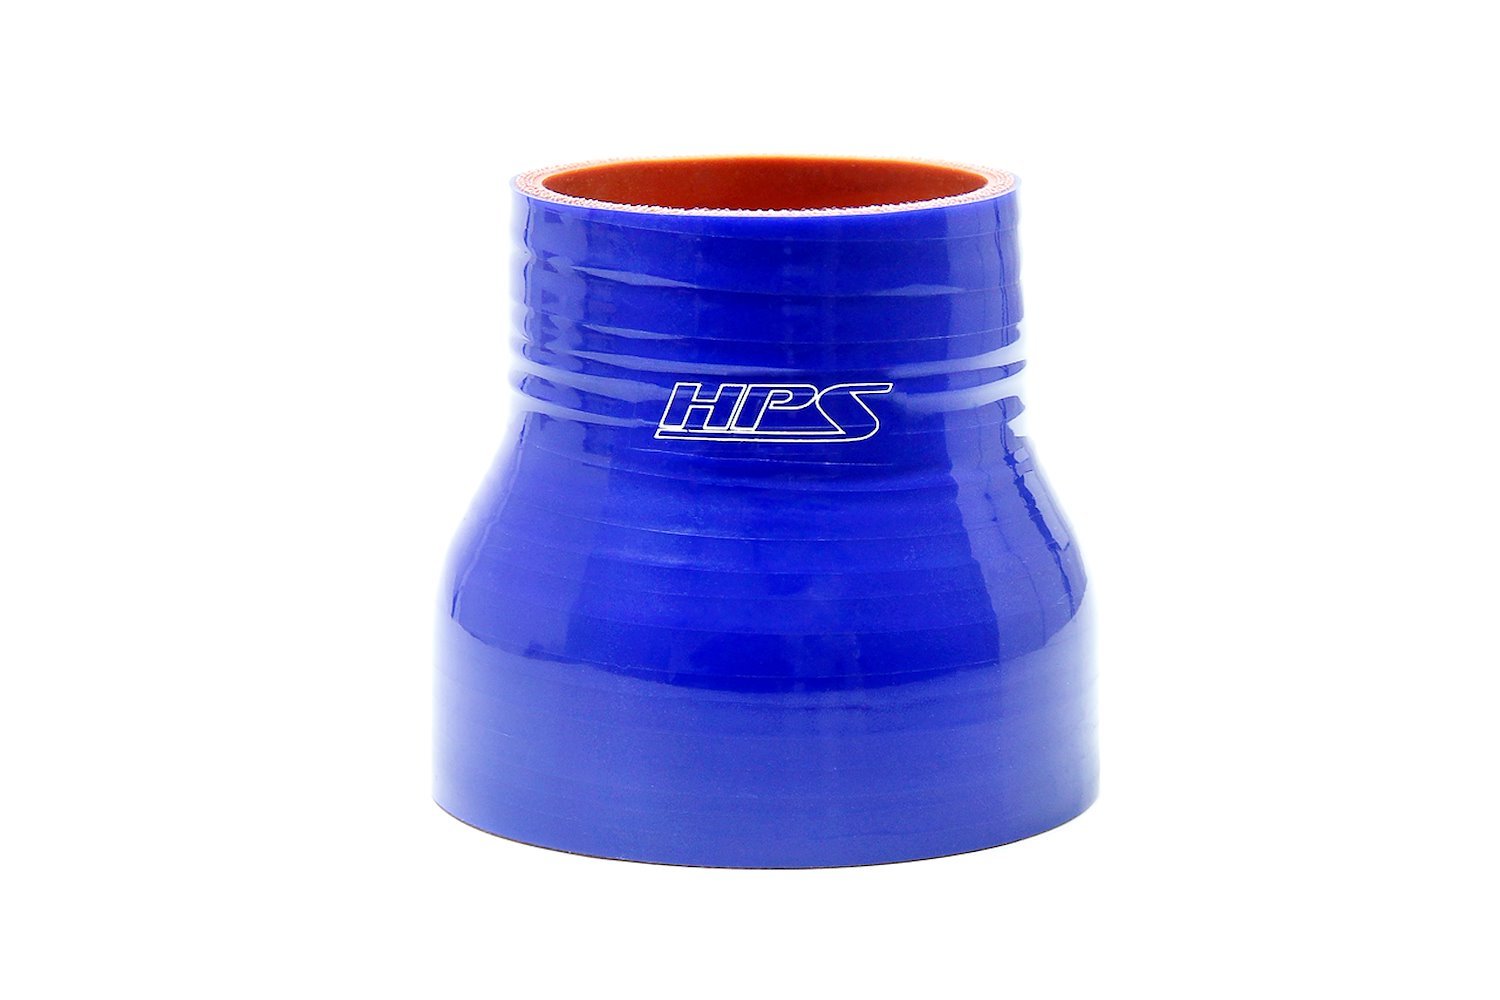 HTSR-162-238-BLUE Silicone Reducer Hose, High-Temp 4-Ply Reinforced, 1-5/8 in. - 2-3/8 in. ID, 3 in. Long, Blue